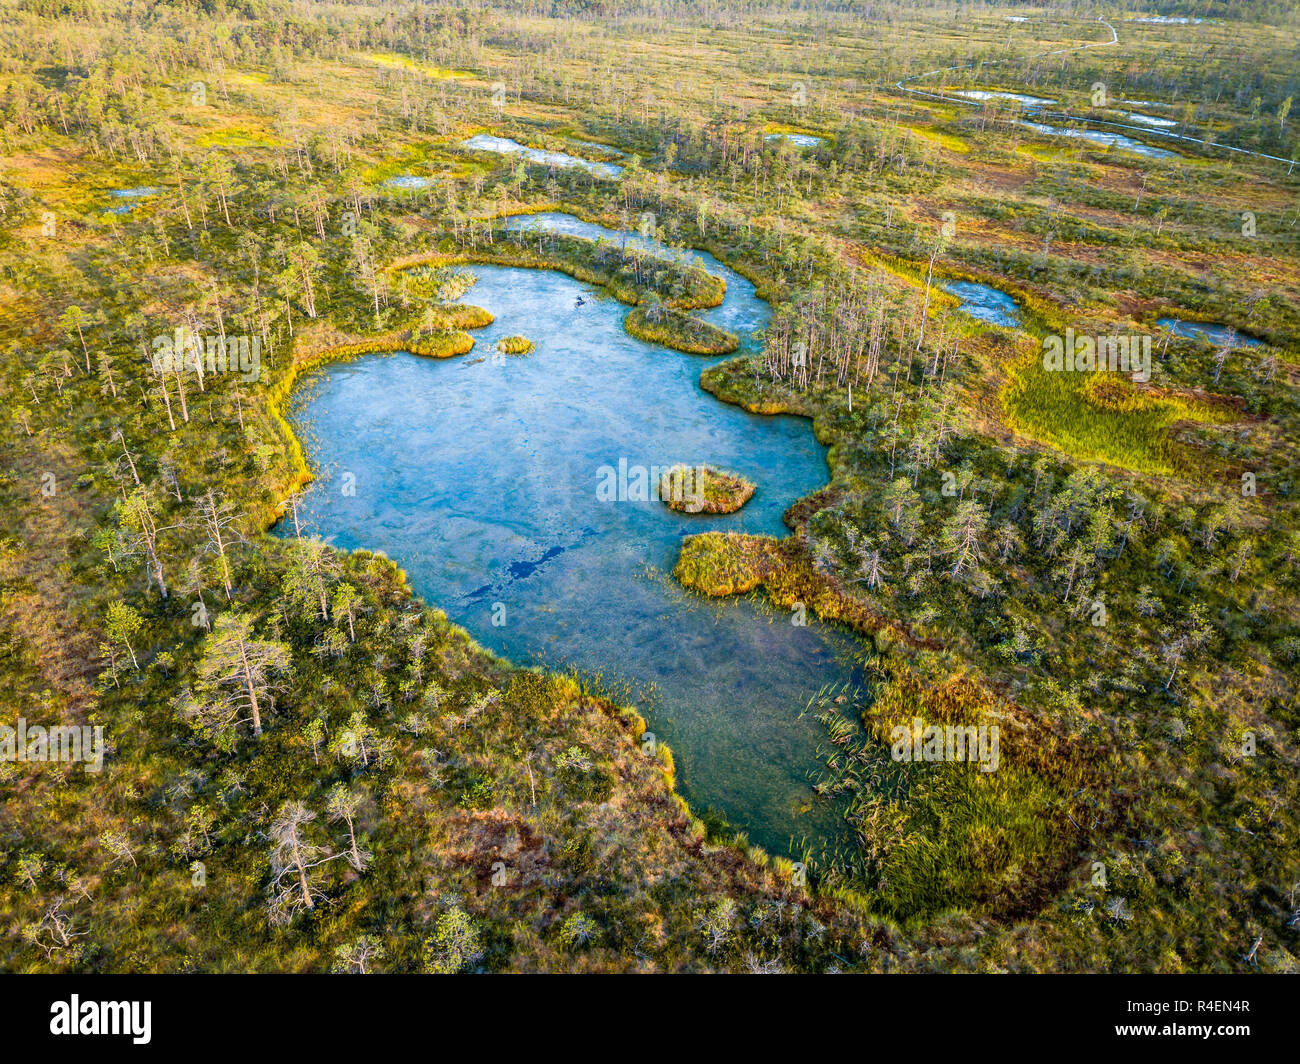 Moody Drone Photo of Colorful Moorland in Early Summer Sunrise with Small Ponds in it Stock Photo